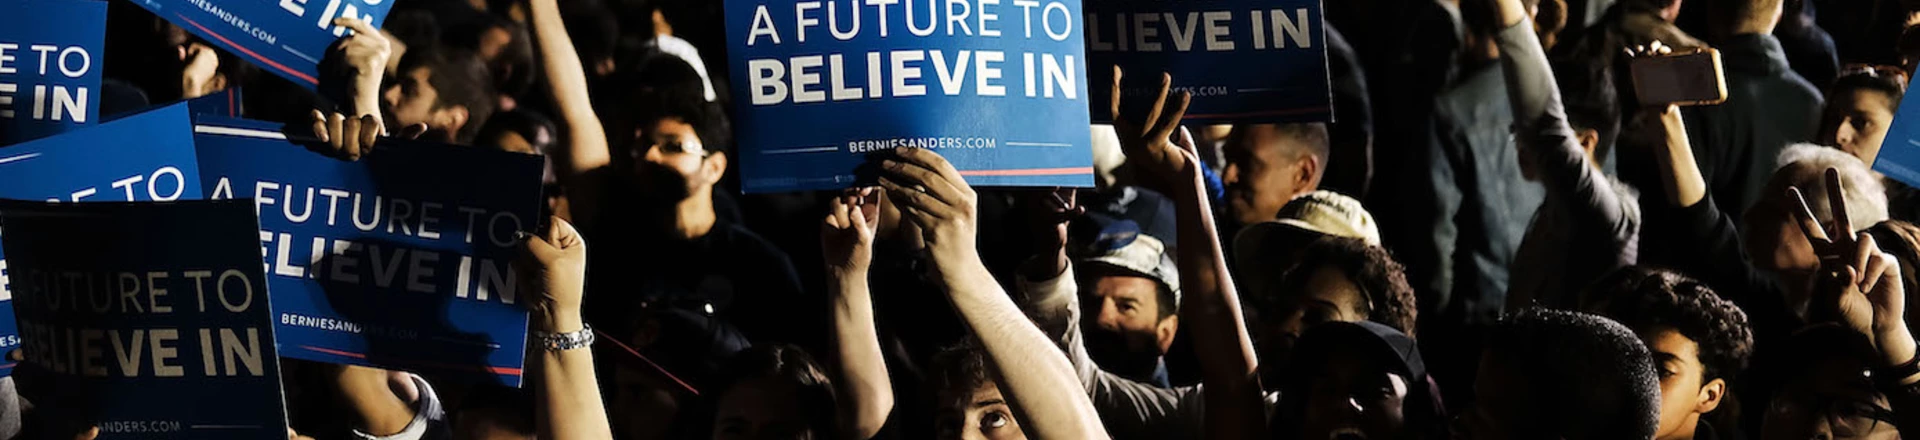 NEW YORK, NY - APRIL 18:  People cheer as Democratic Presidential candidate Bernie Sanders walks on stage at a campaign rally on the eve of the New York primary, April 18, 2016 in the Queens borough of New York City. While Sanders is still behind in the delegate count with Hillary Clinton, he has energized many young and liberal voters around the country. New York holds its primary this Tuesday.  (Photo by Spencer Platt/Getty Images)